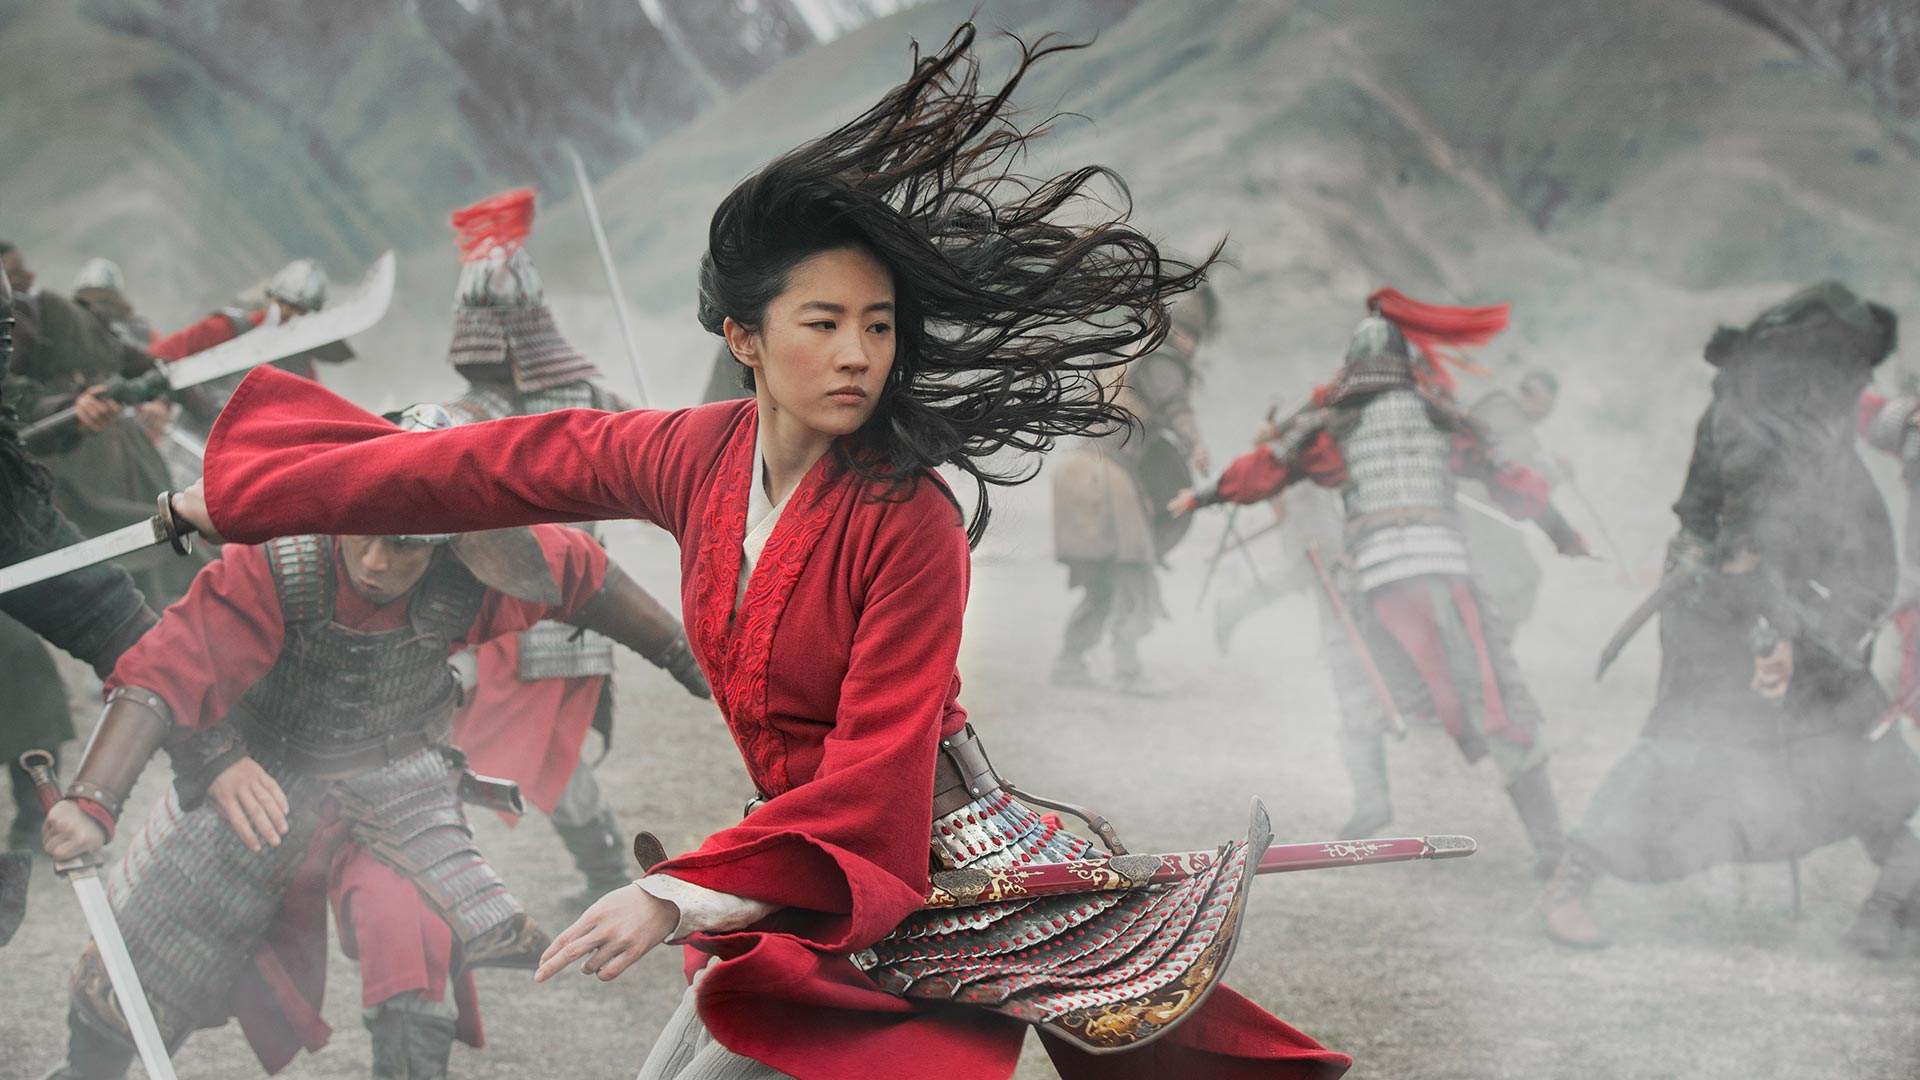 The Stirring and Visually Spectacular New 'Mulan' Is One of Disney's Better Live-Action Remakes